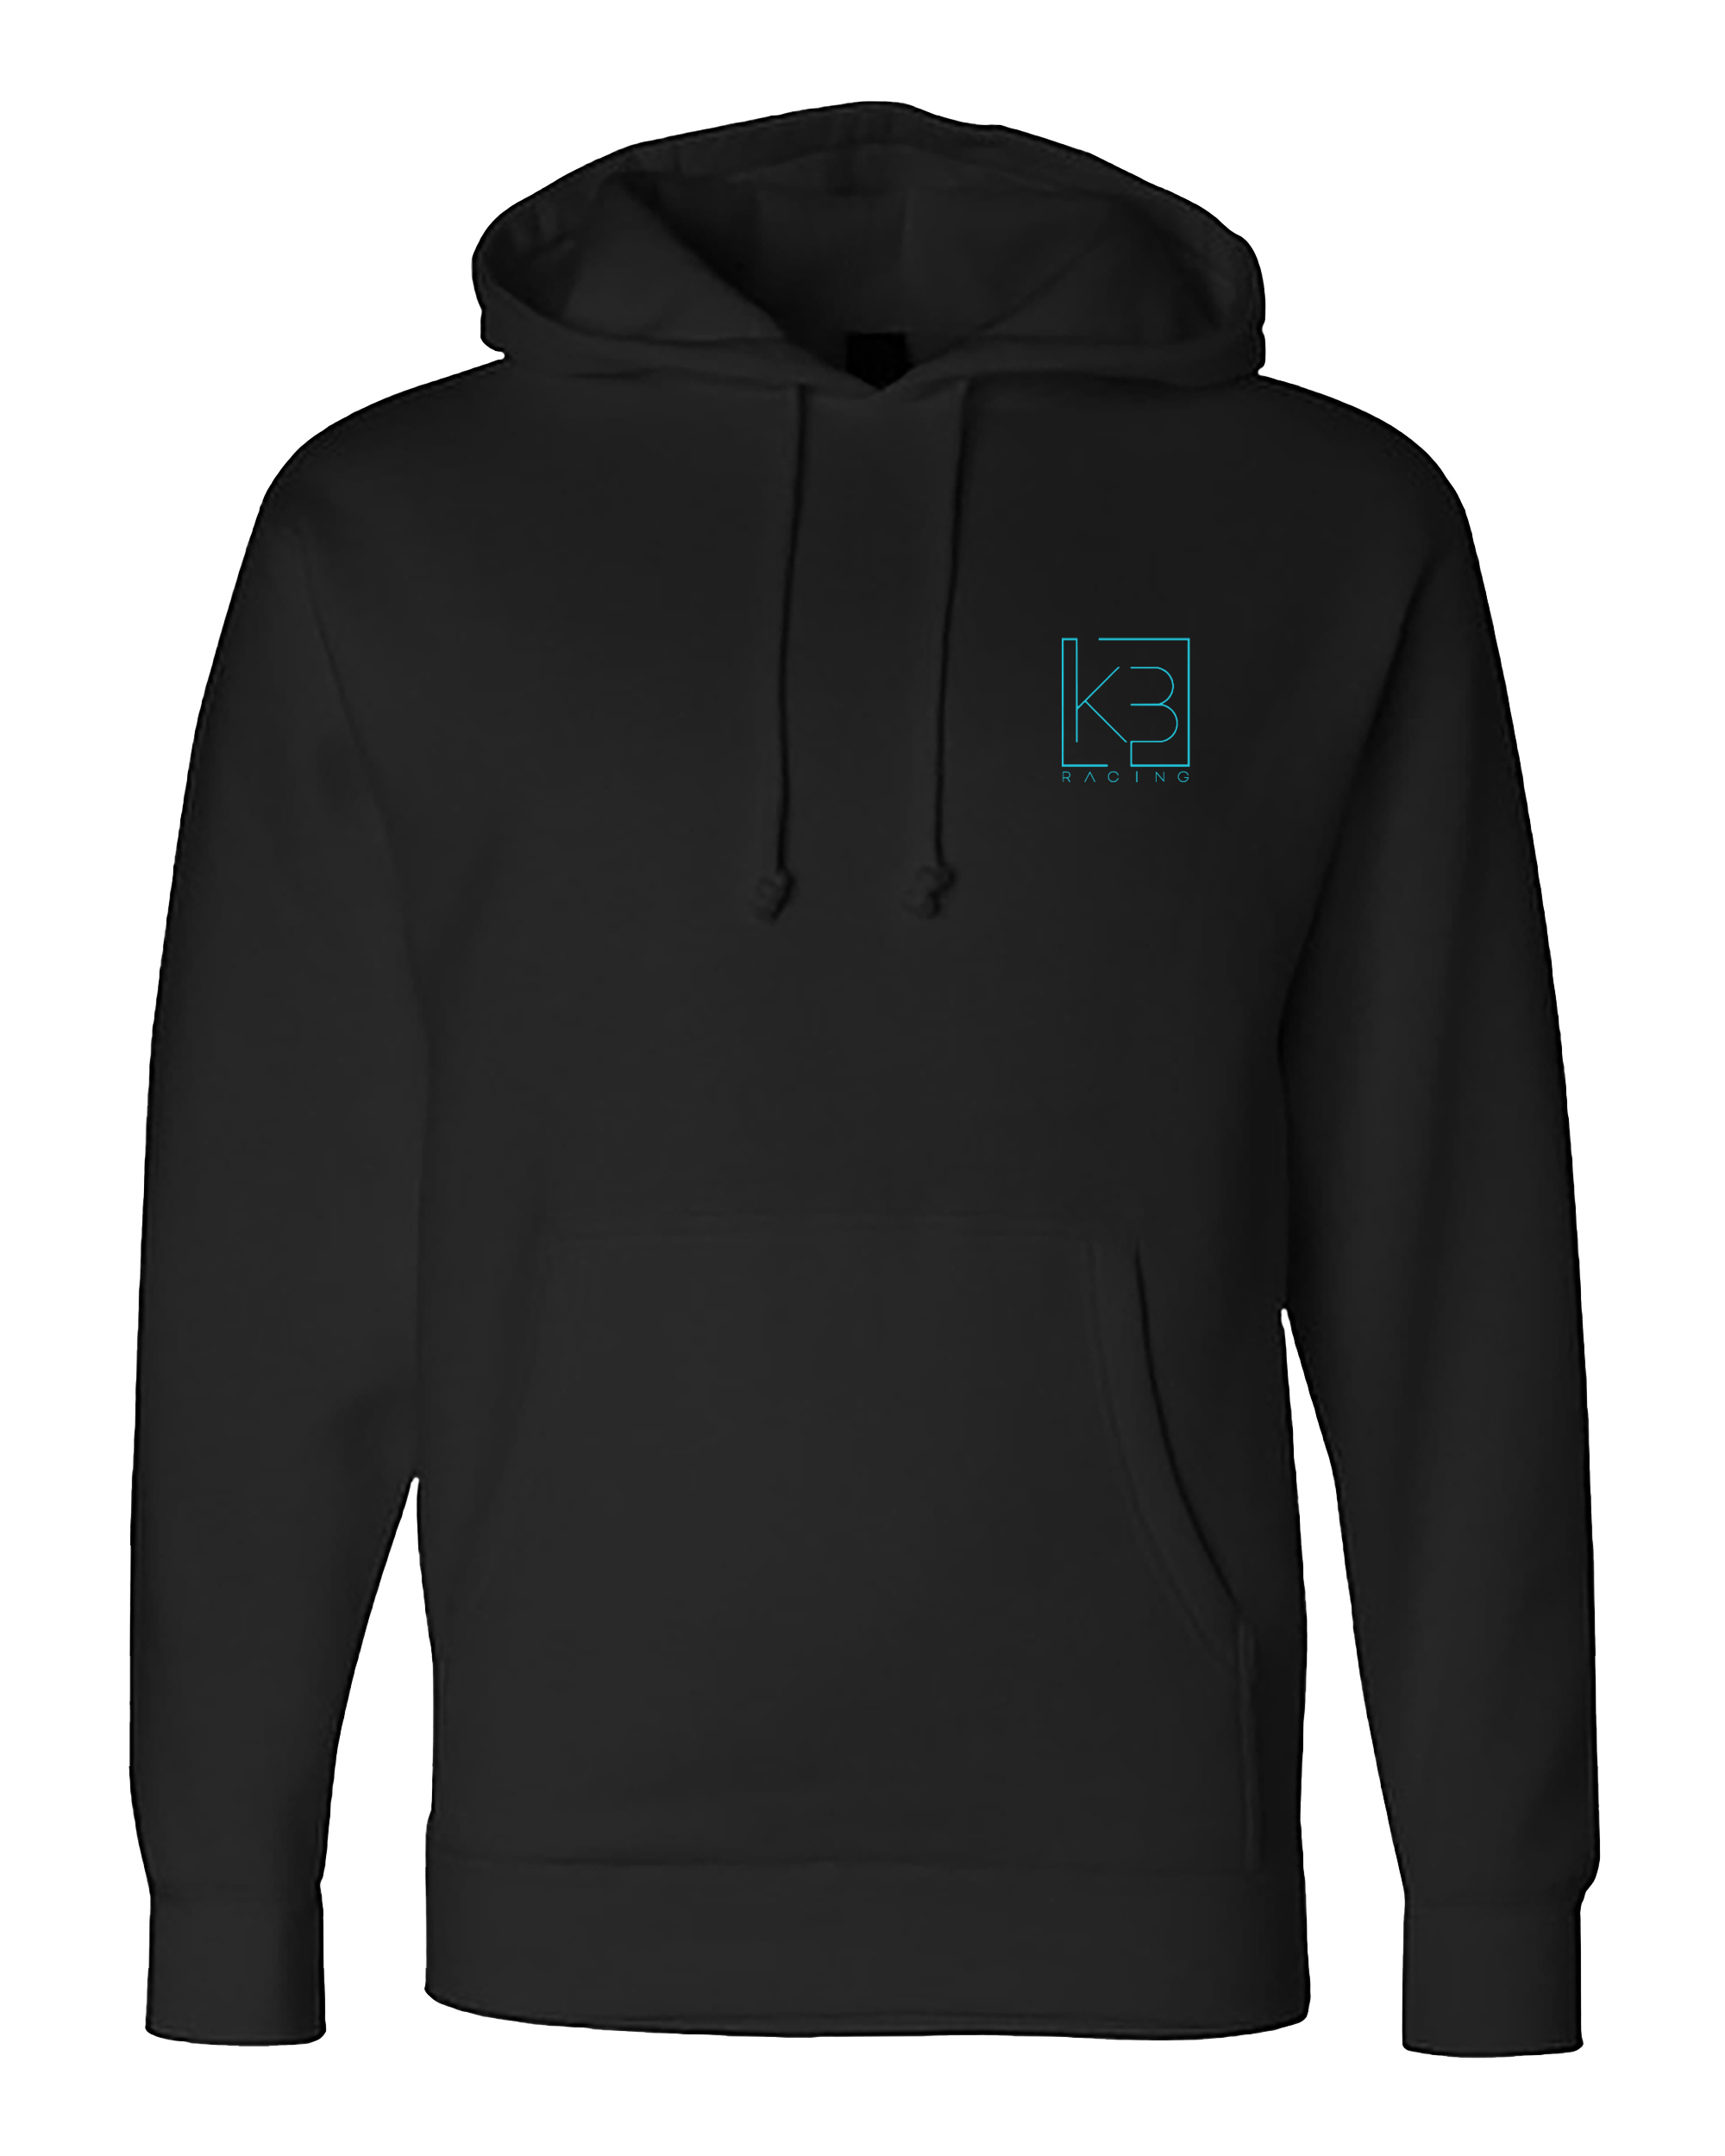 Don't be a lady - Kayleigh Buyck Hoodie